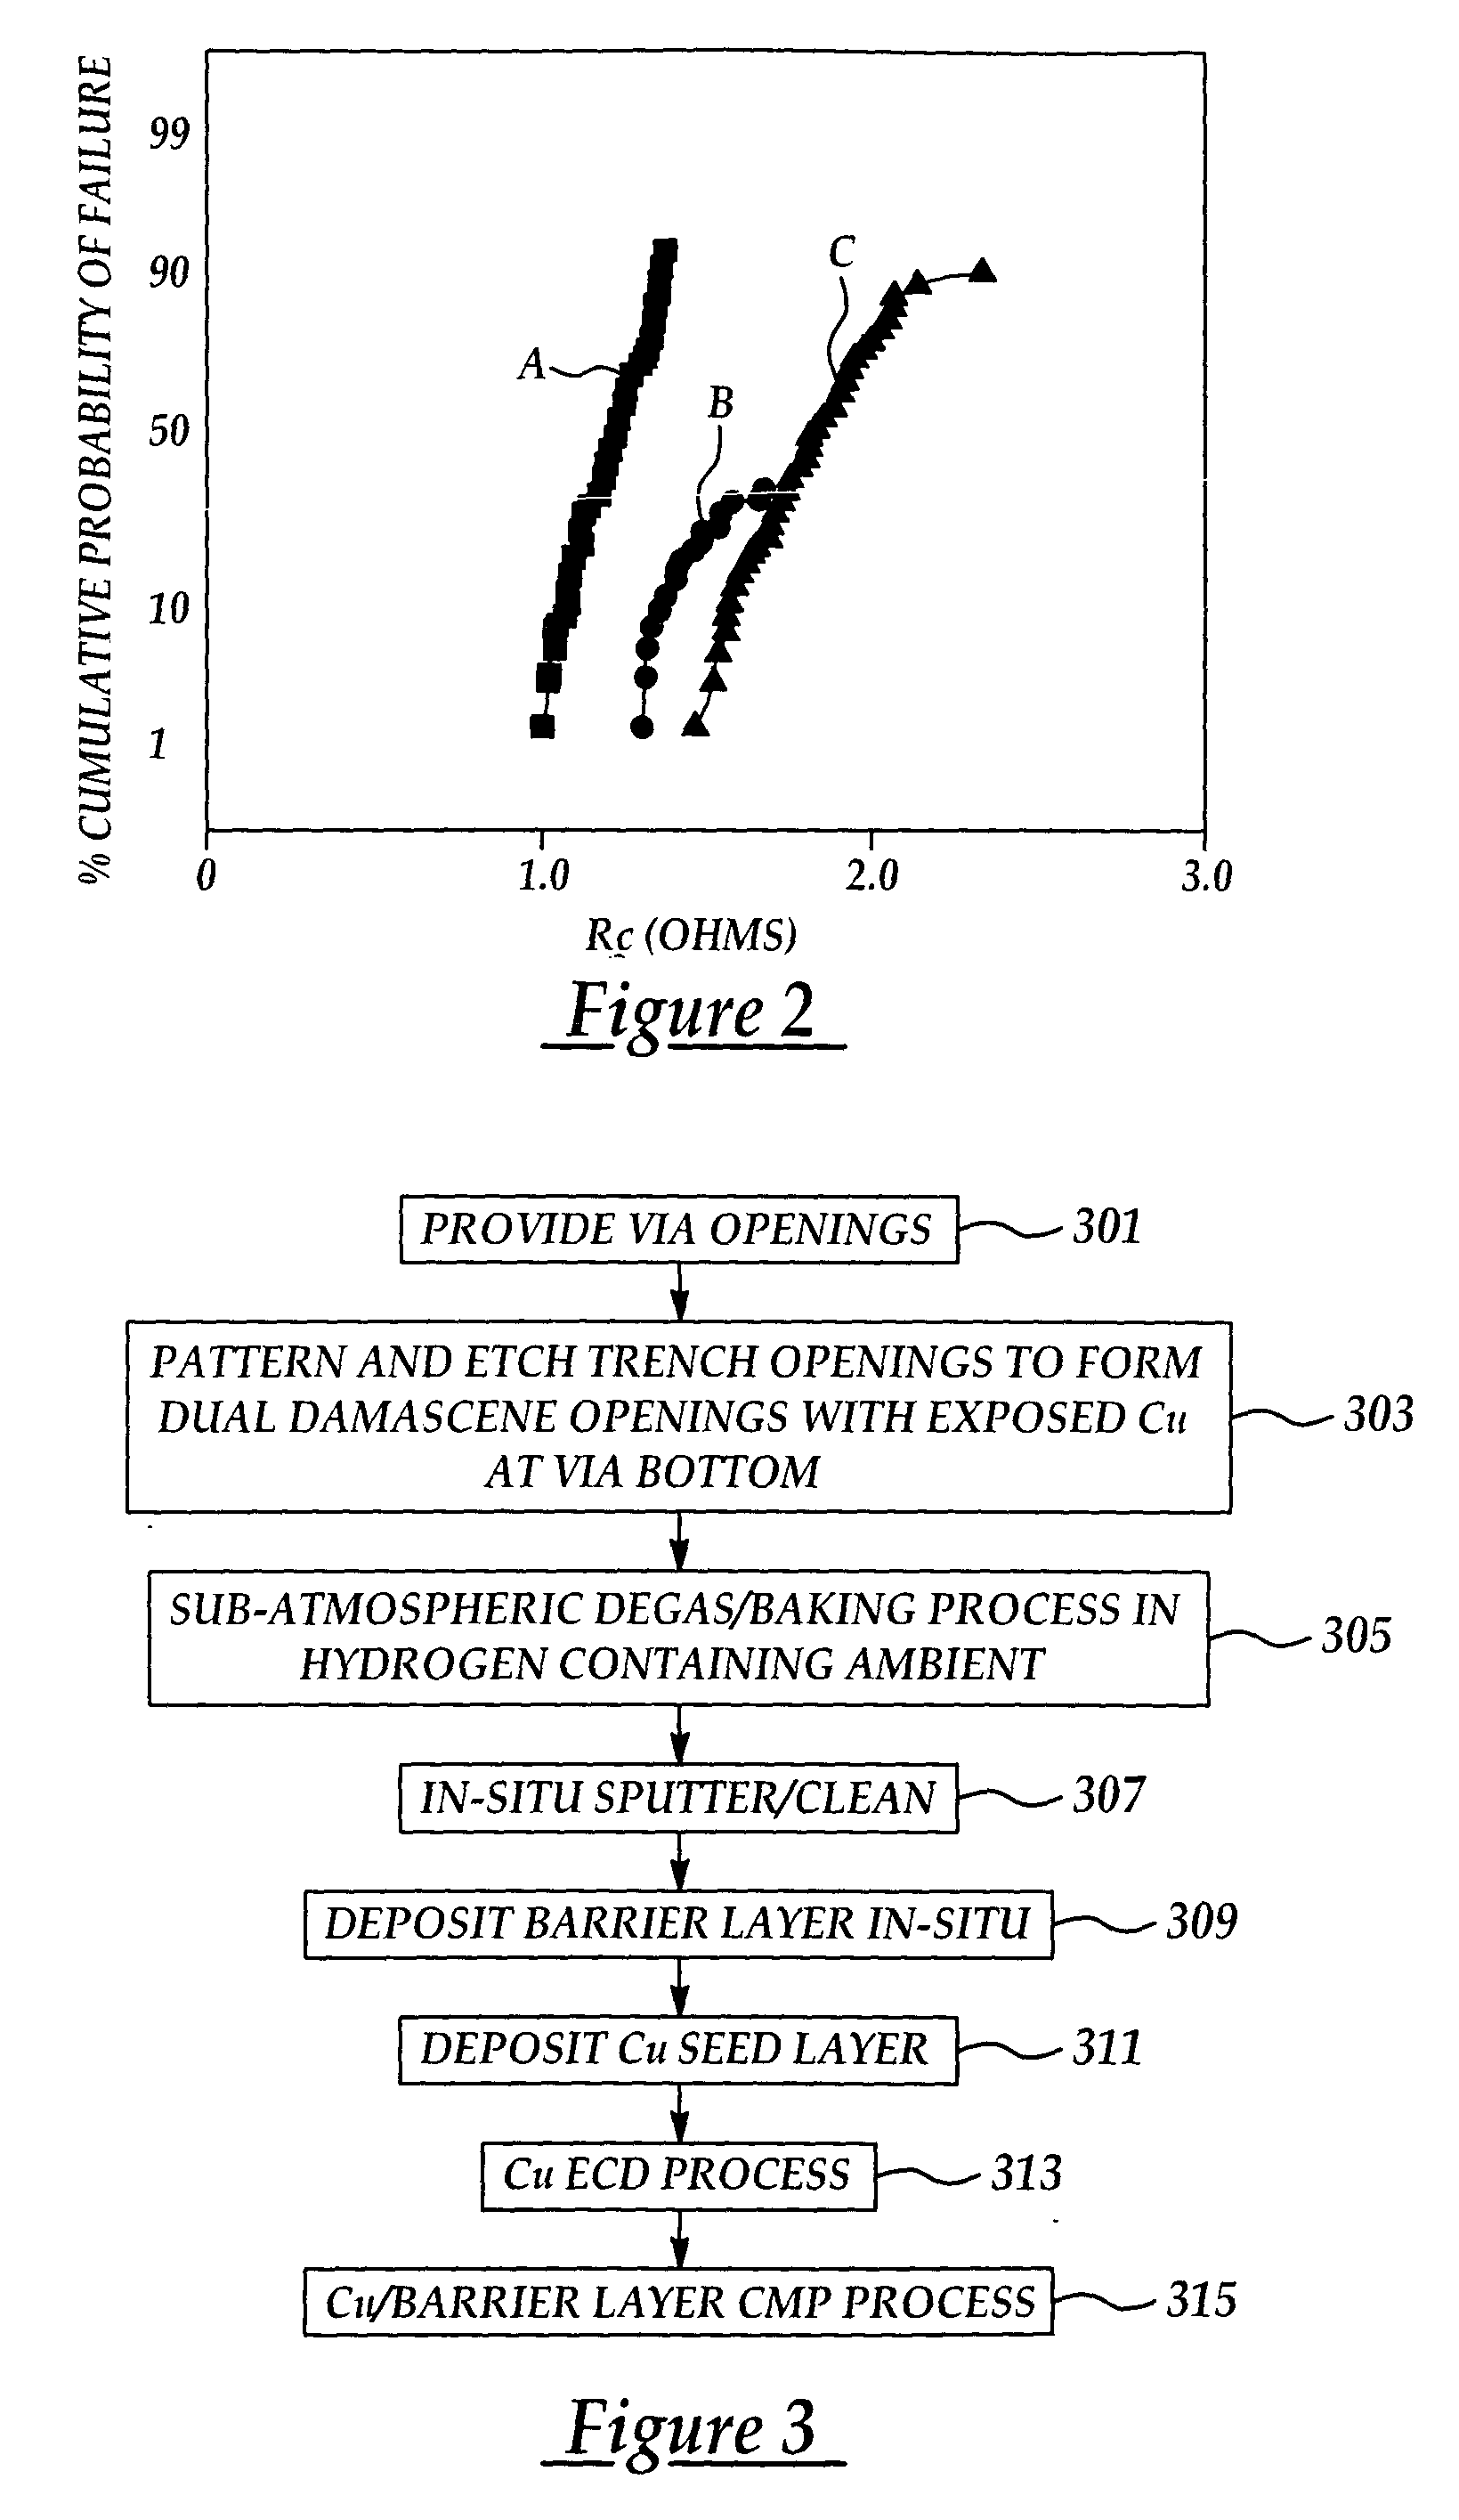 Method for simultaneous degas and baking in copper damascene process